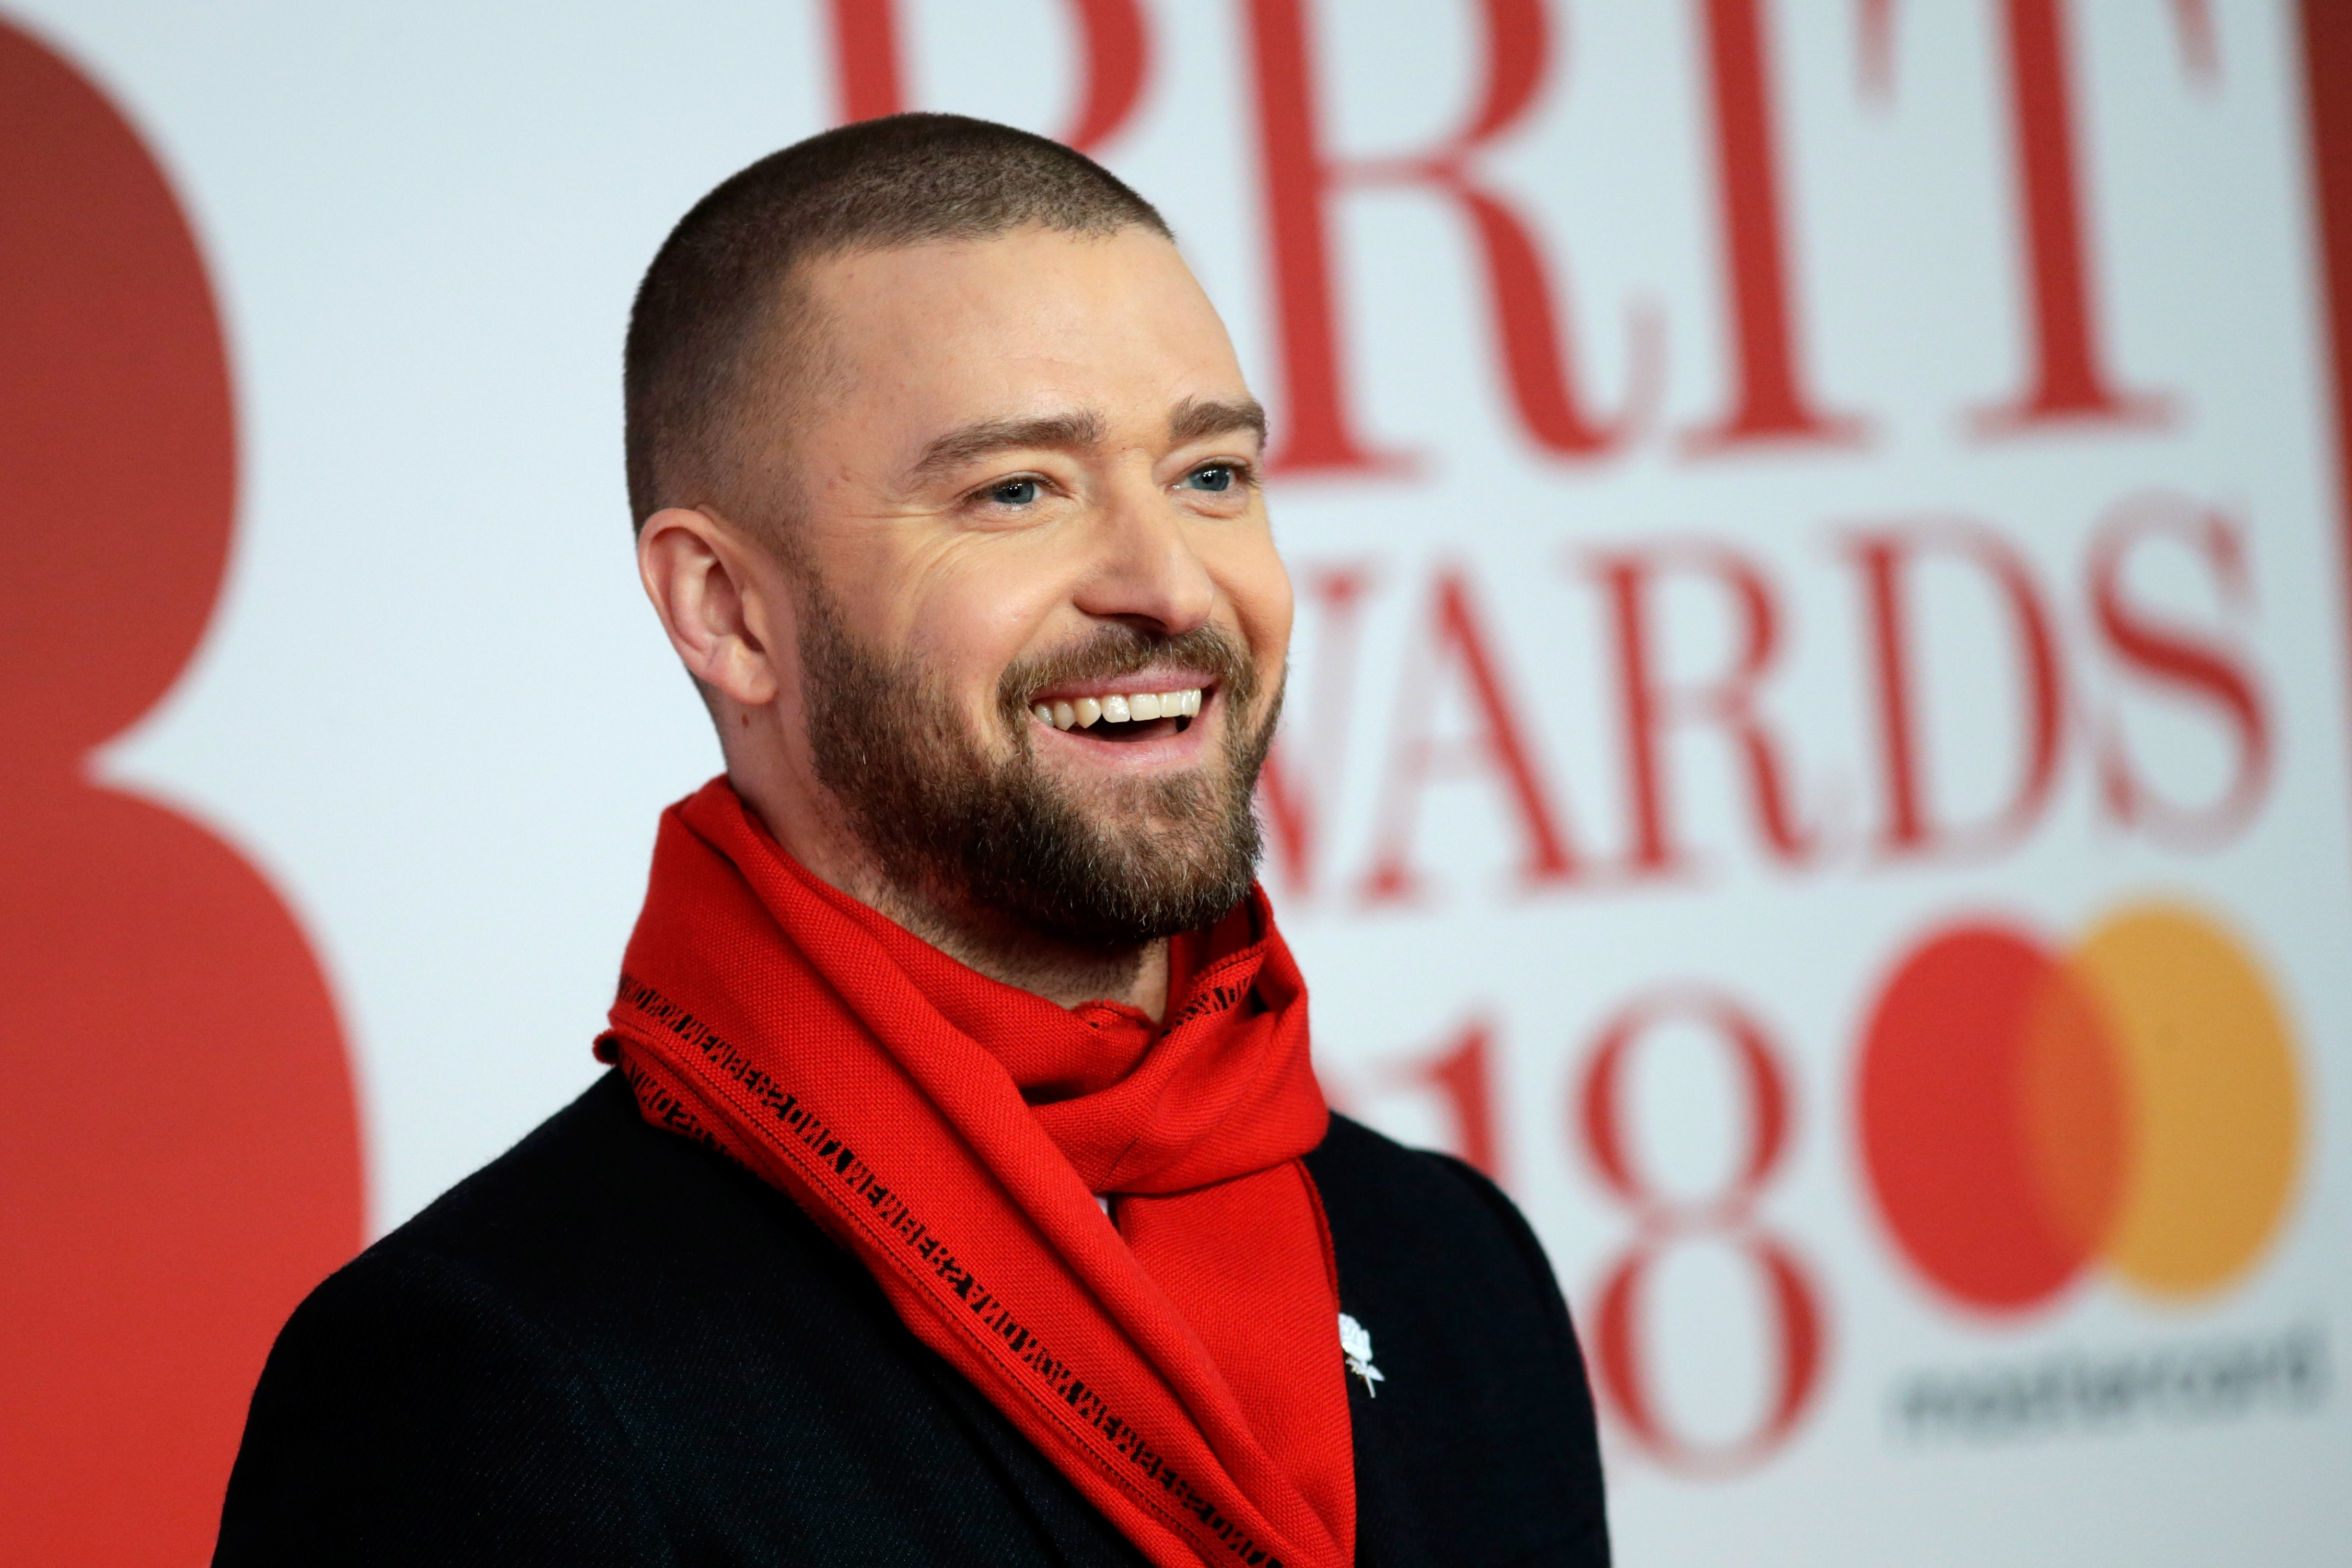 Justin Timberlake attends The Brit Awards 2018 held at The O2 Arena on February 21, 2018, in London, England. | Source: Getty Images